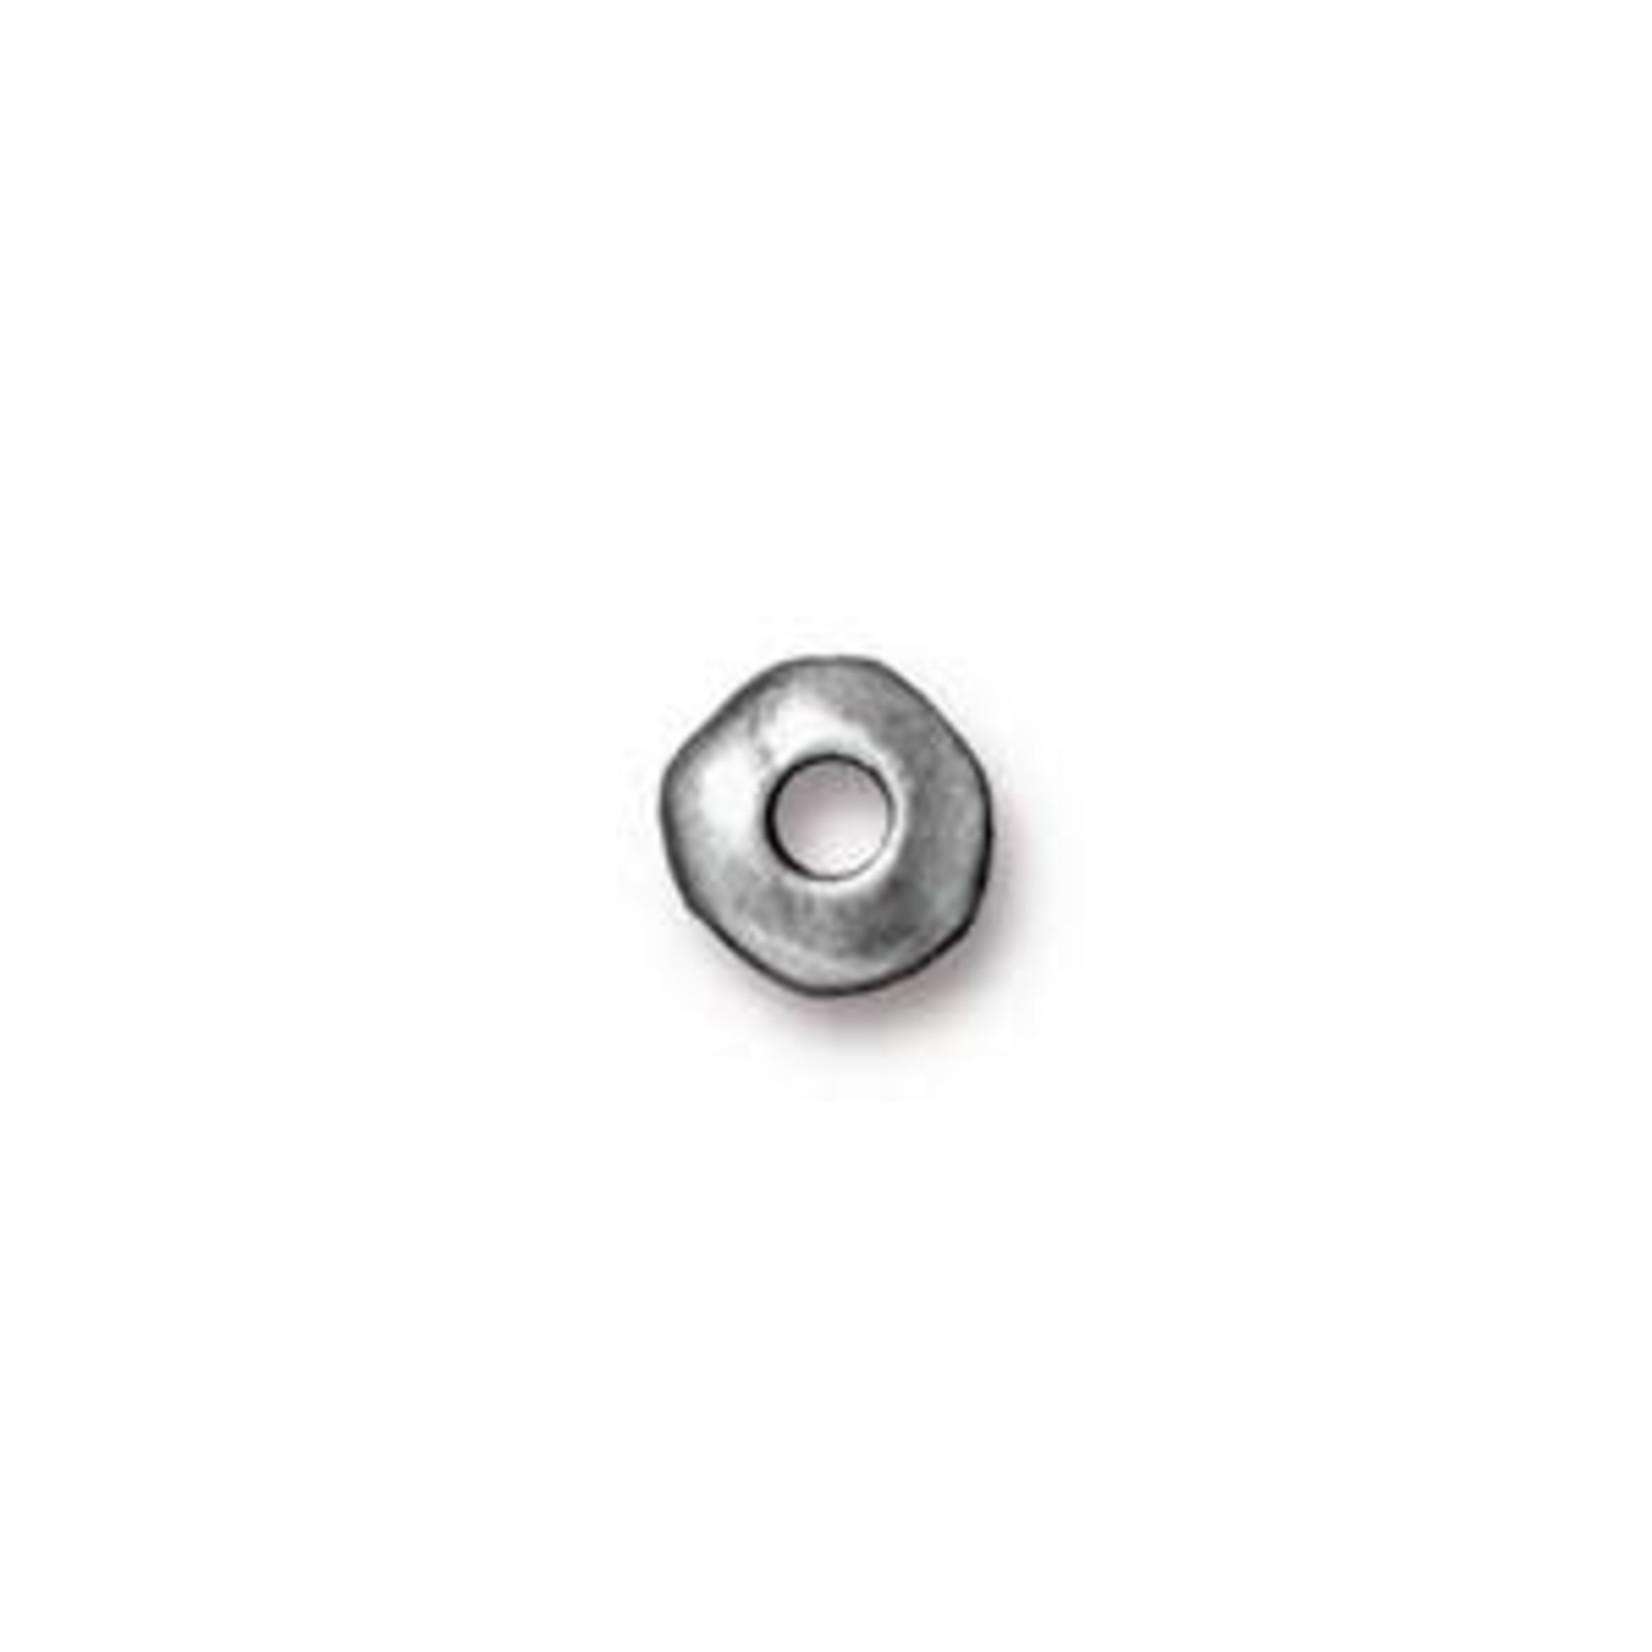 Nugget 7mm Large Hole Spacer Bead Antique Pewter